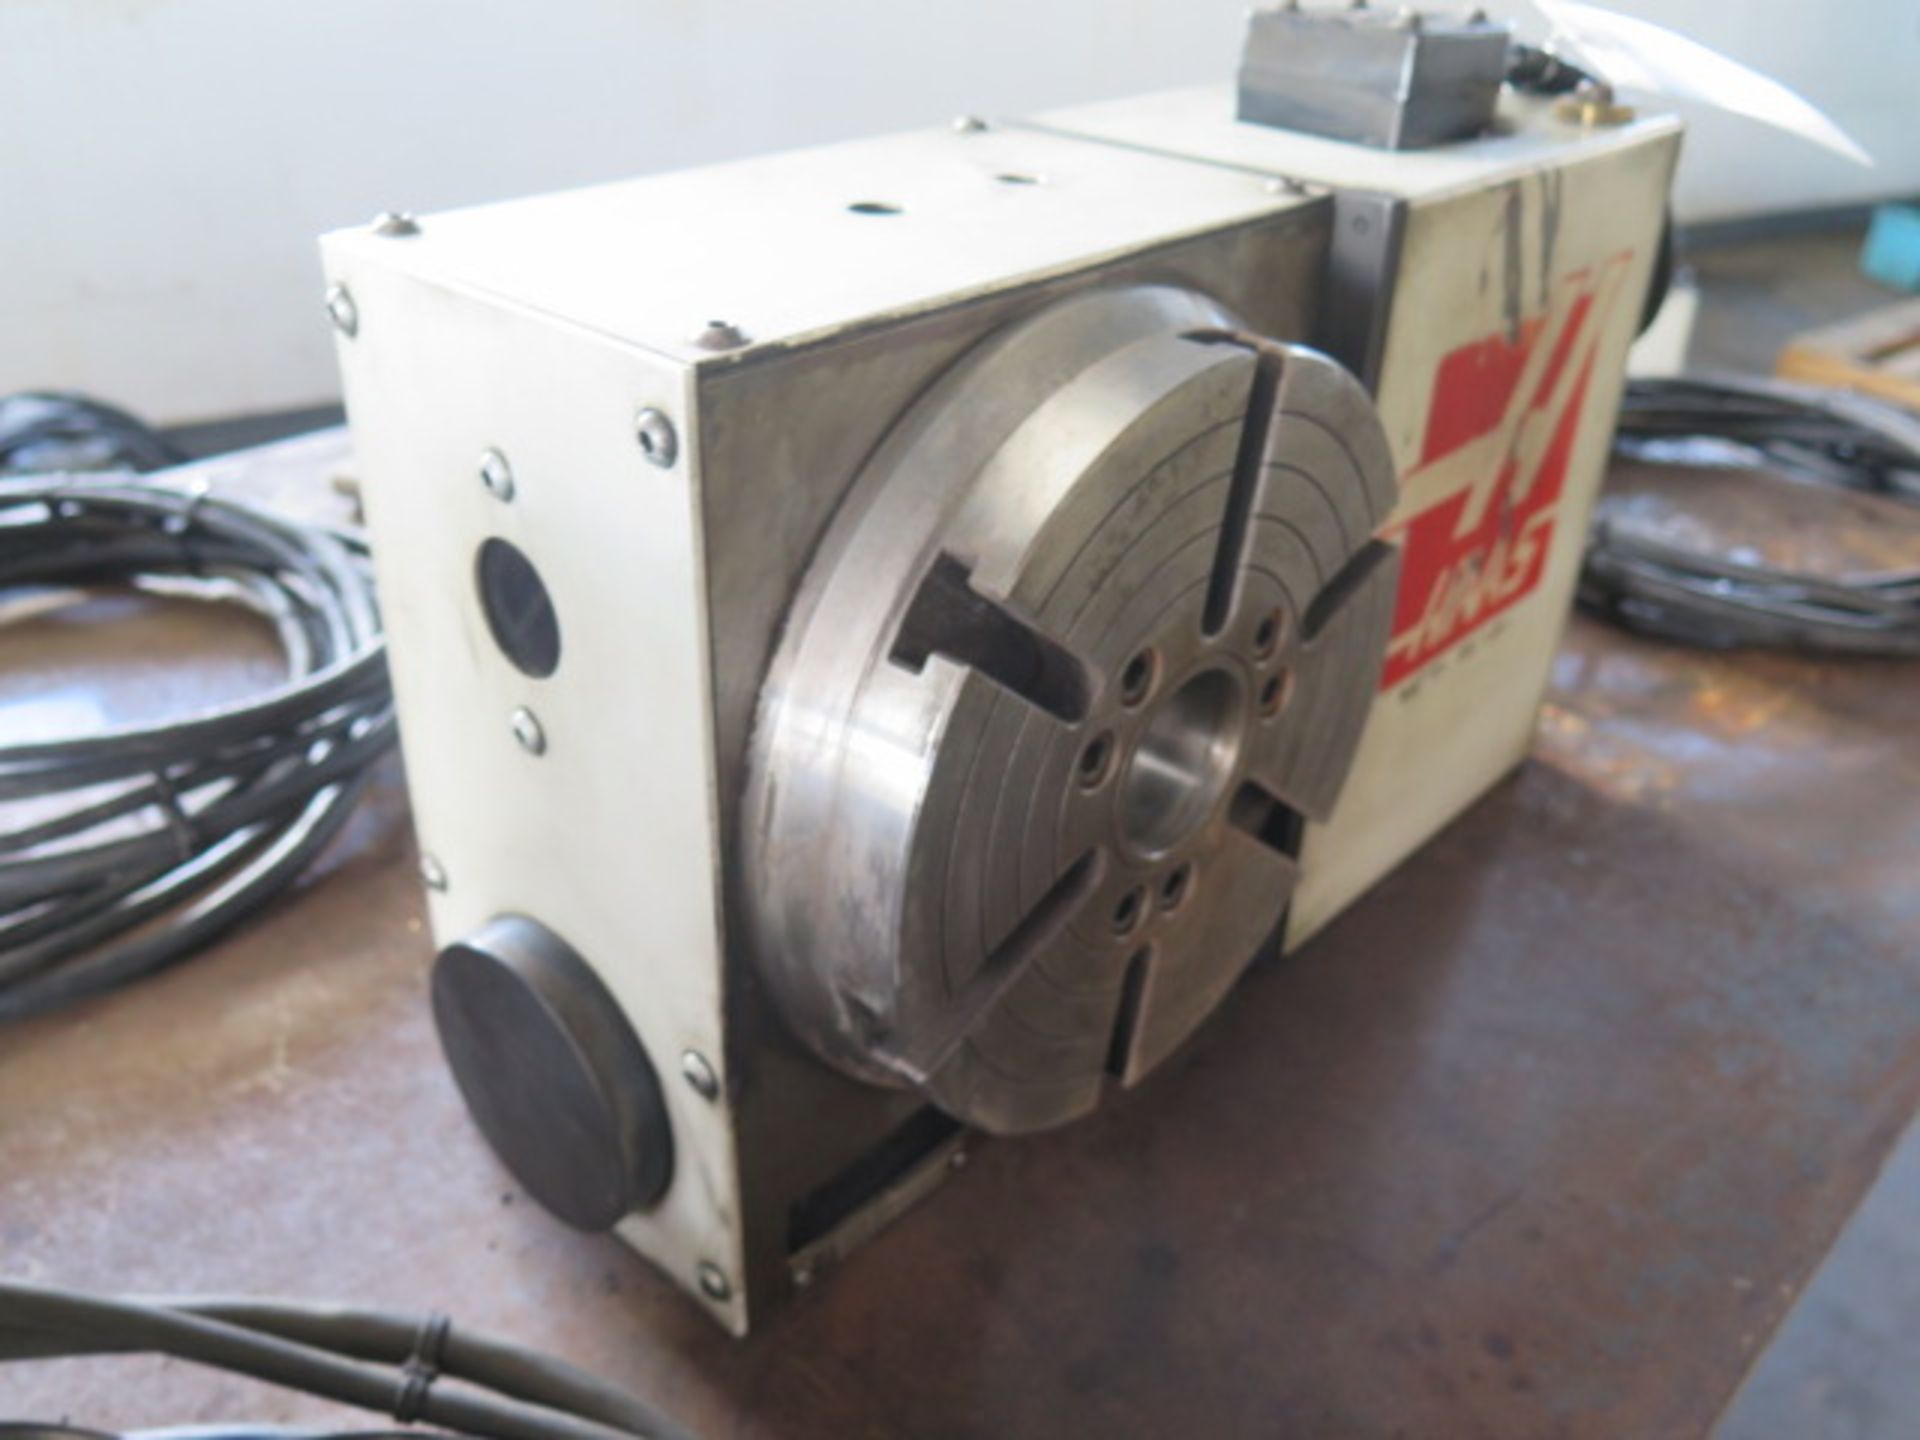 Haas HRT210H 8” 4th Axis Rotary Indexer s/n 220217 ( Change Parameter 45 VALUE from “0” to “16384”) - Image 2 of 8